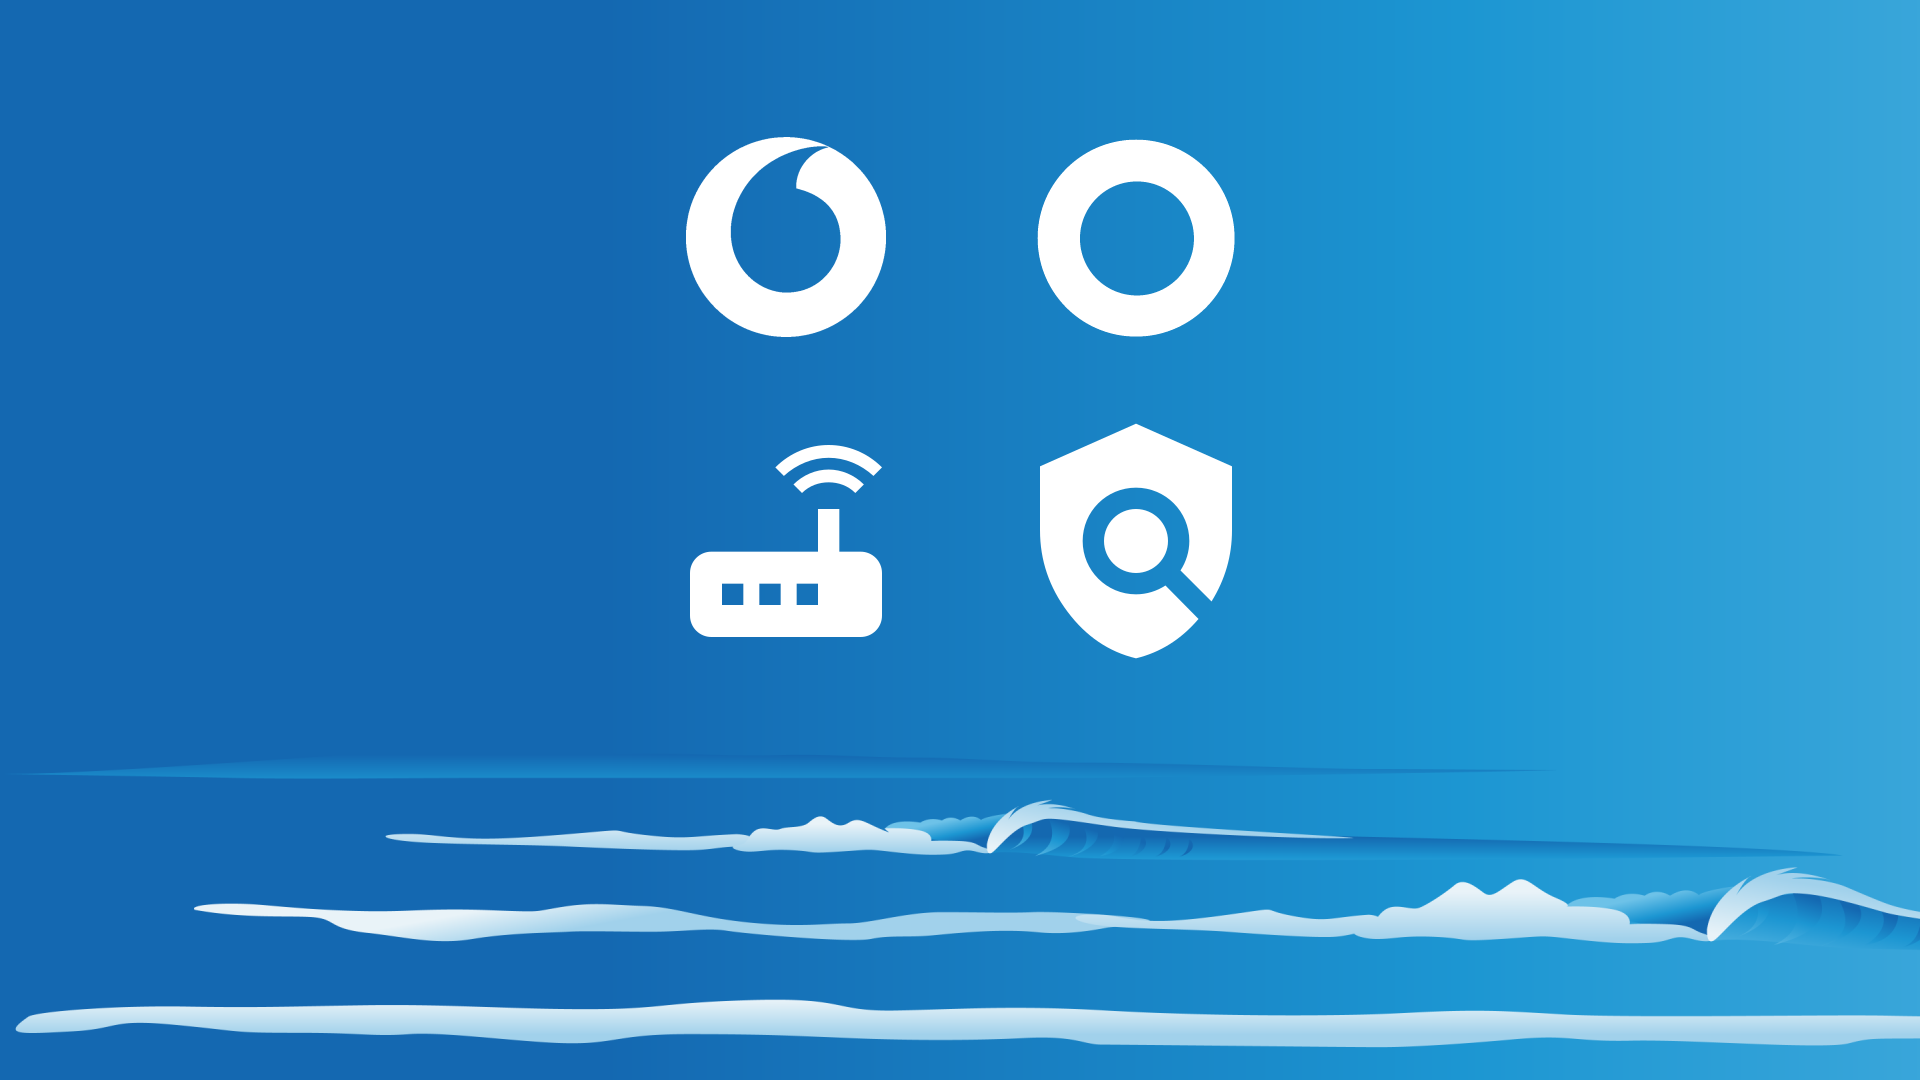 Sea background with Vodafone NZ / One NZ logo and wireless router icon